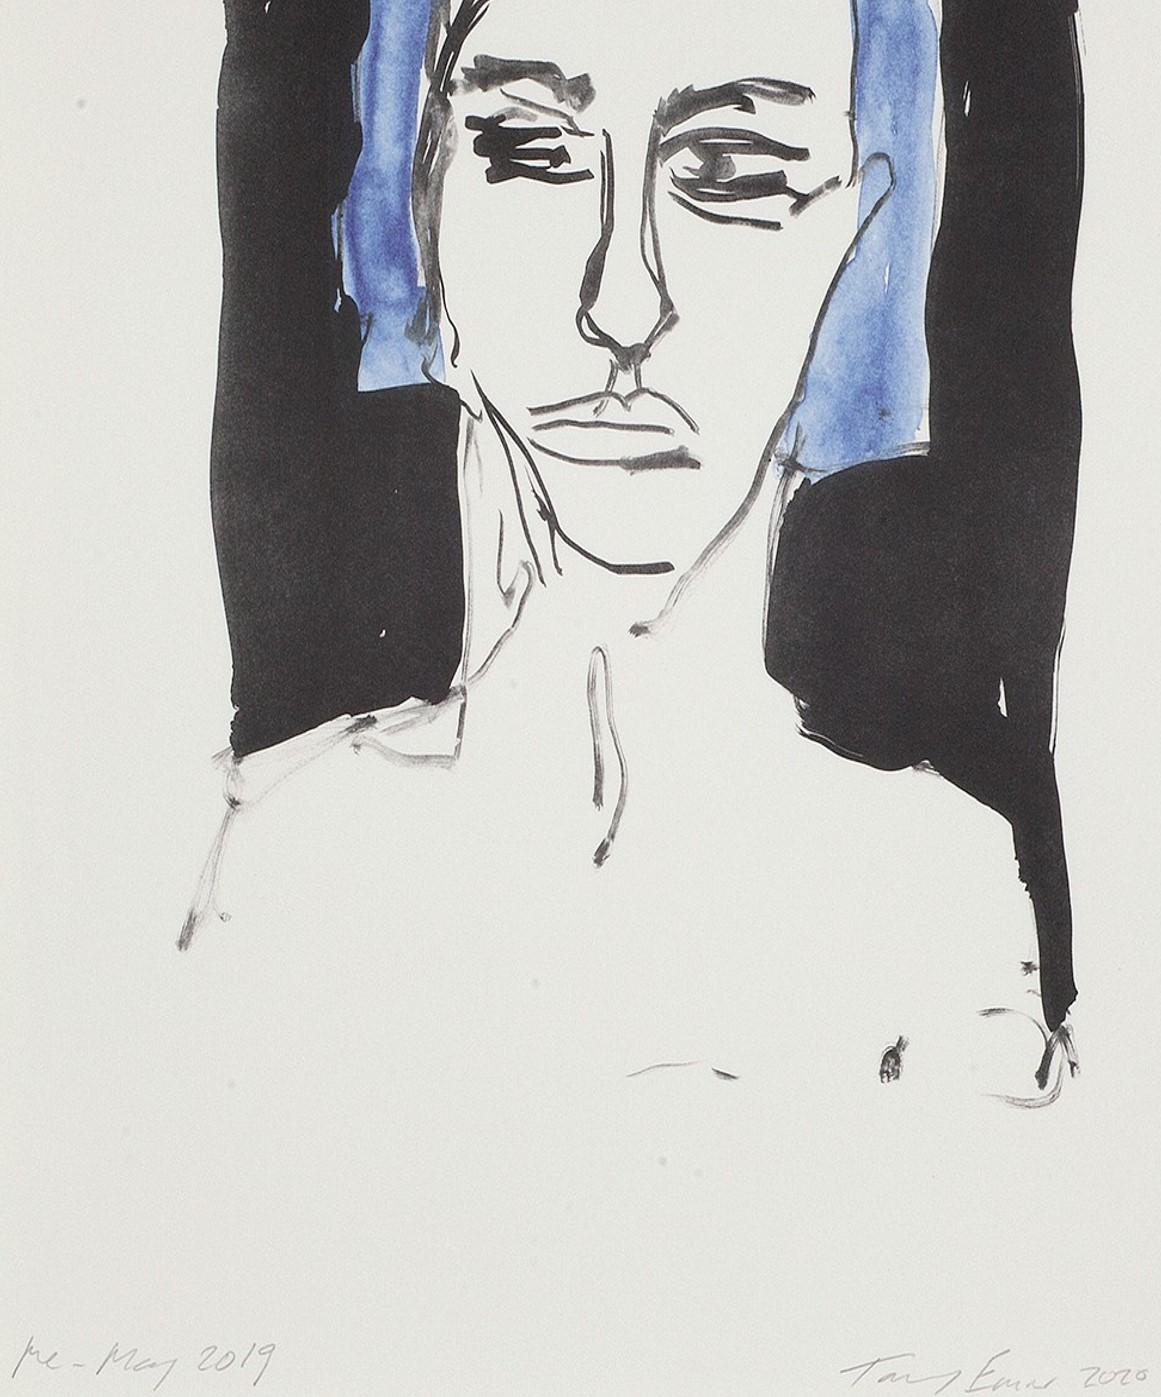 Me - May 2019 - Emin, Contemporary, YBAs, Lithograph, Portrait, Blue
2 colour lithograph on Somerset Velvet Warm White 400gsm
Edition of 50
55,5 x 45,5 cm (21.9 x 17.9 in)
Signed, numbered, and dated by the artist
In mint condition
With certificate